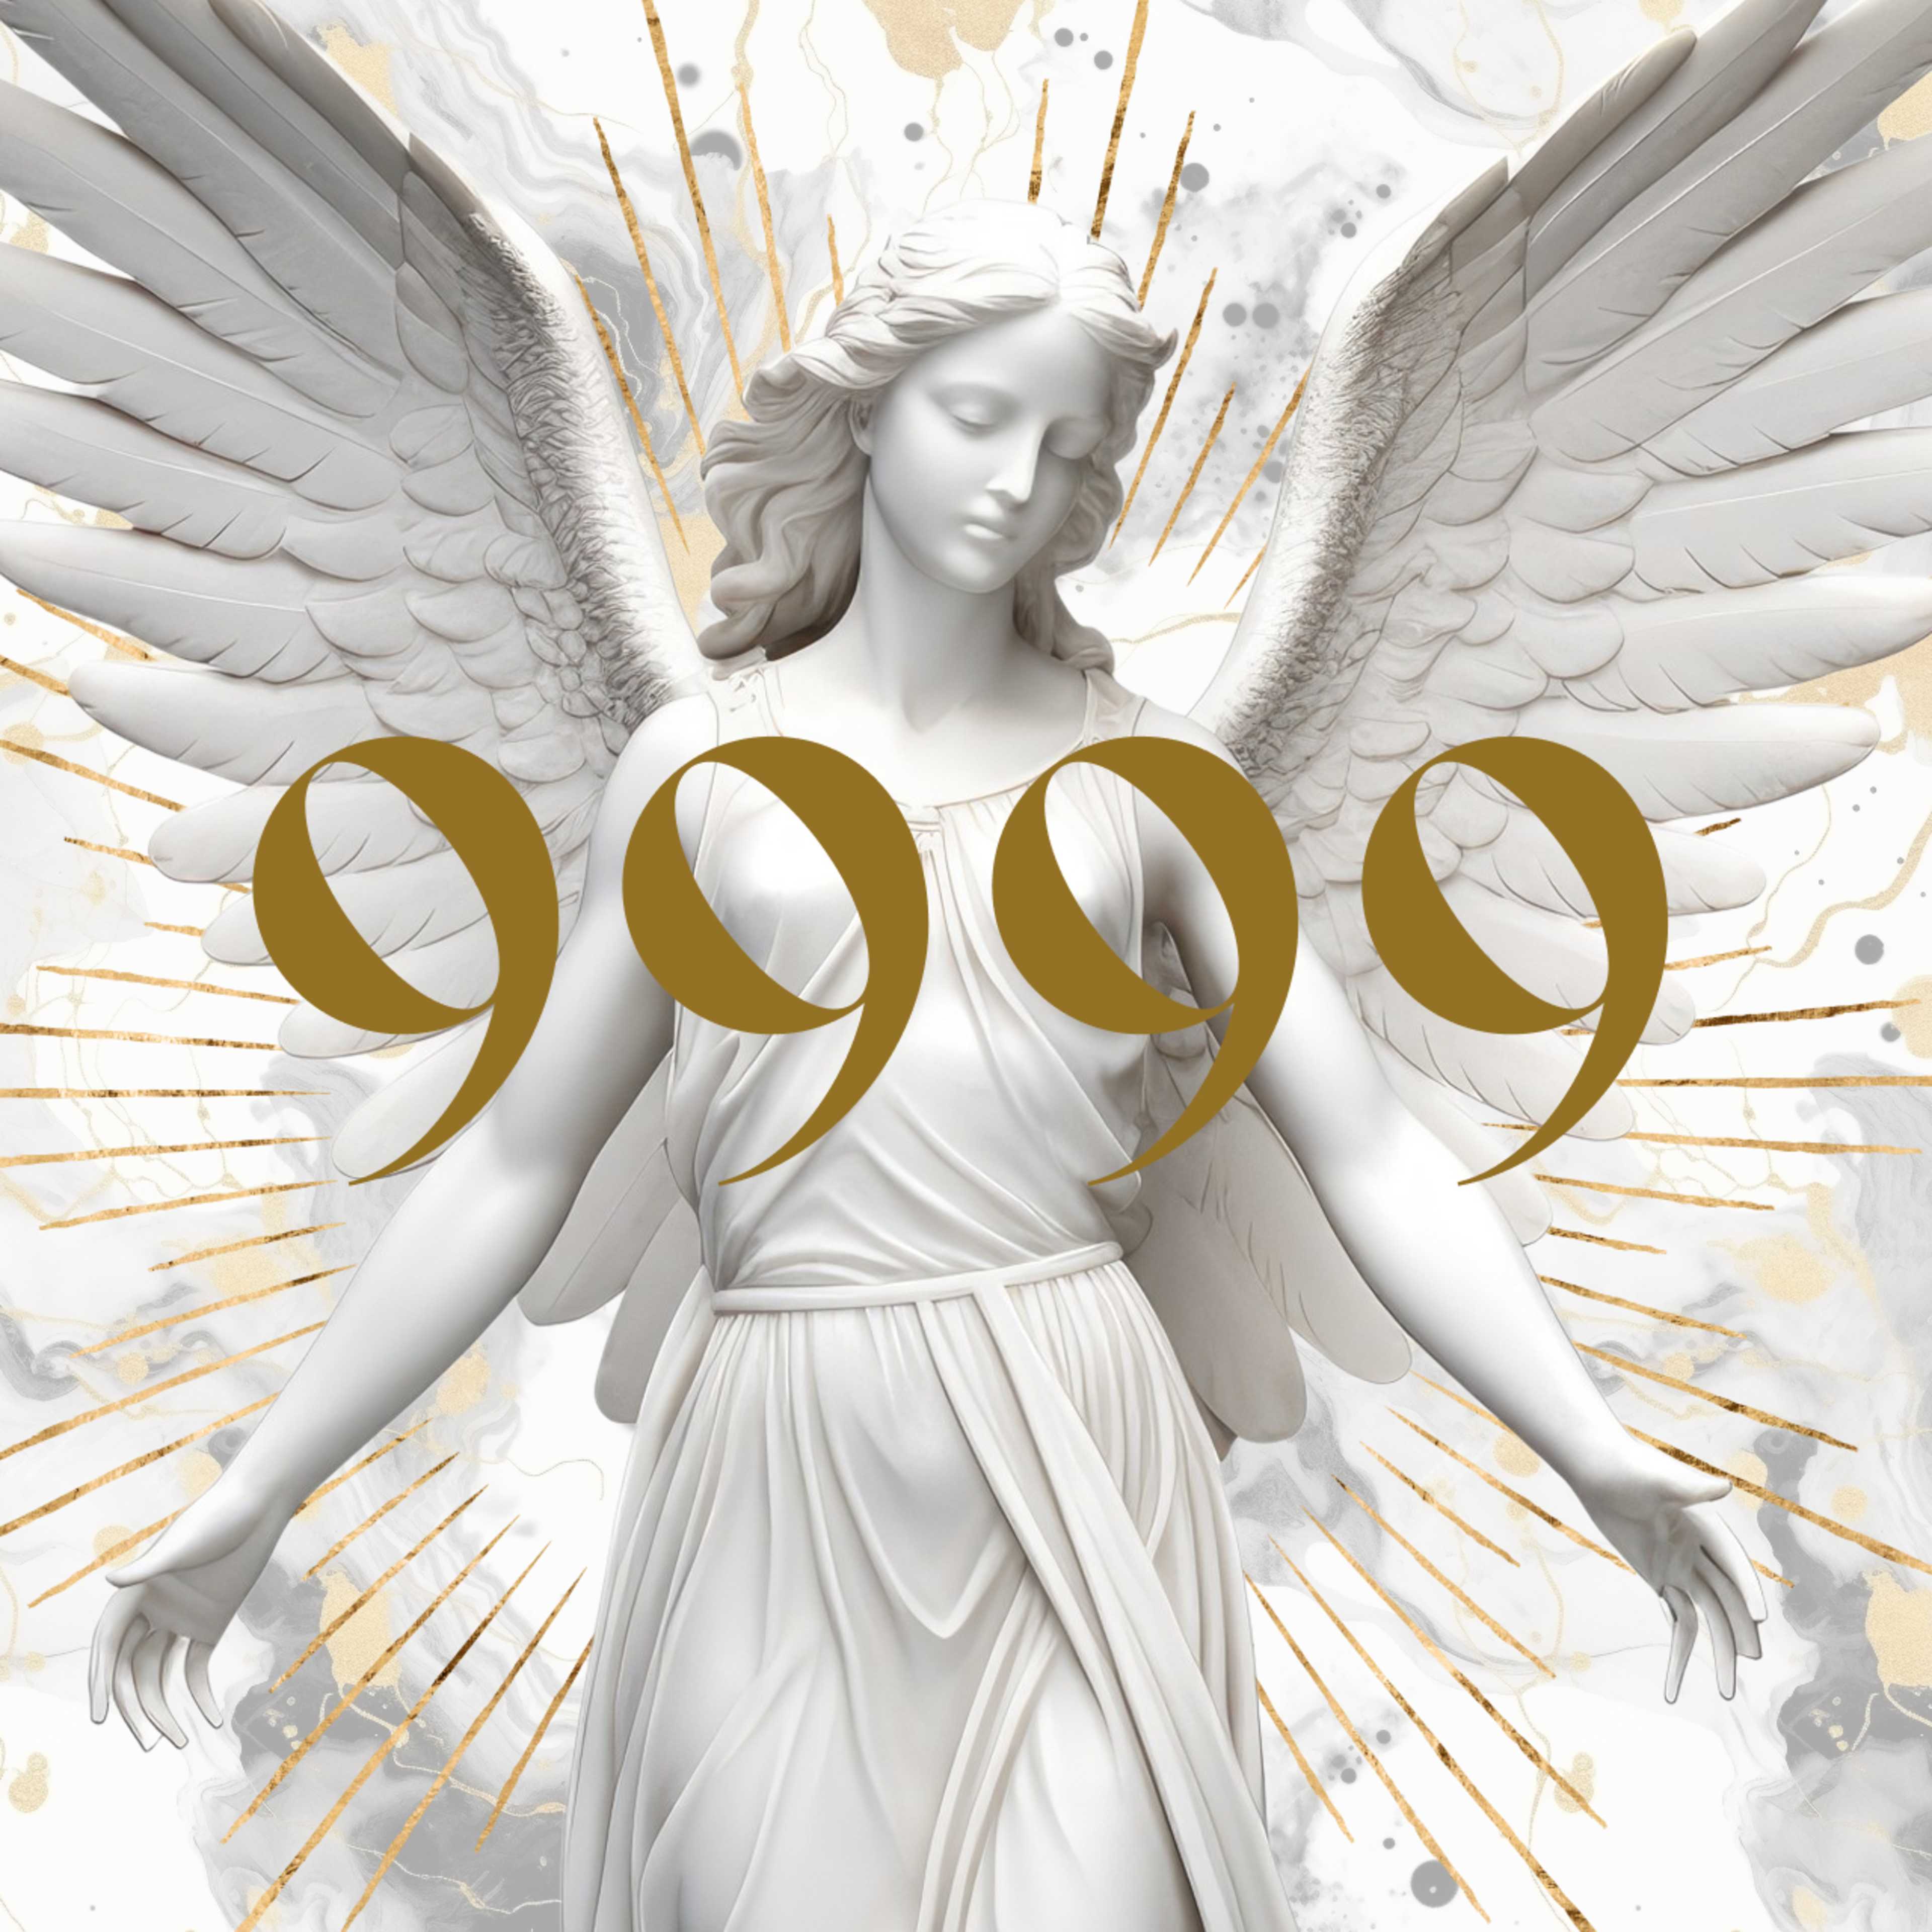 Angel Number 9999 Meaning